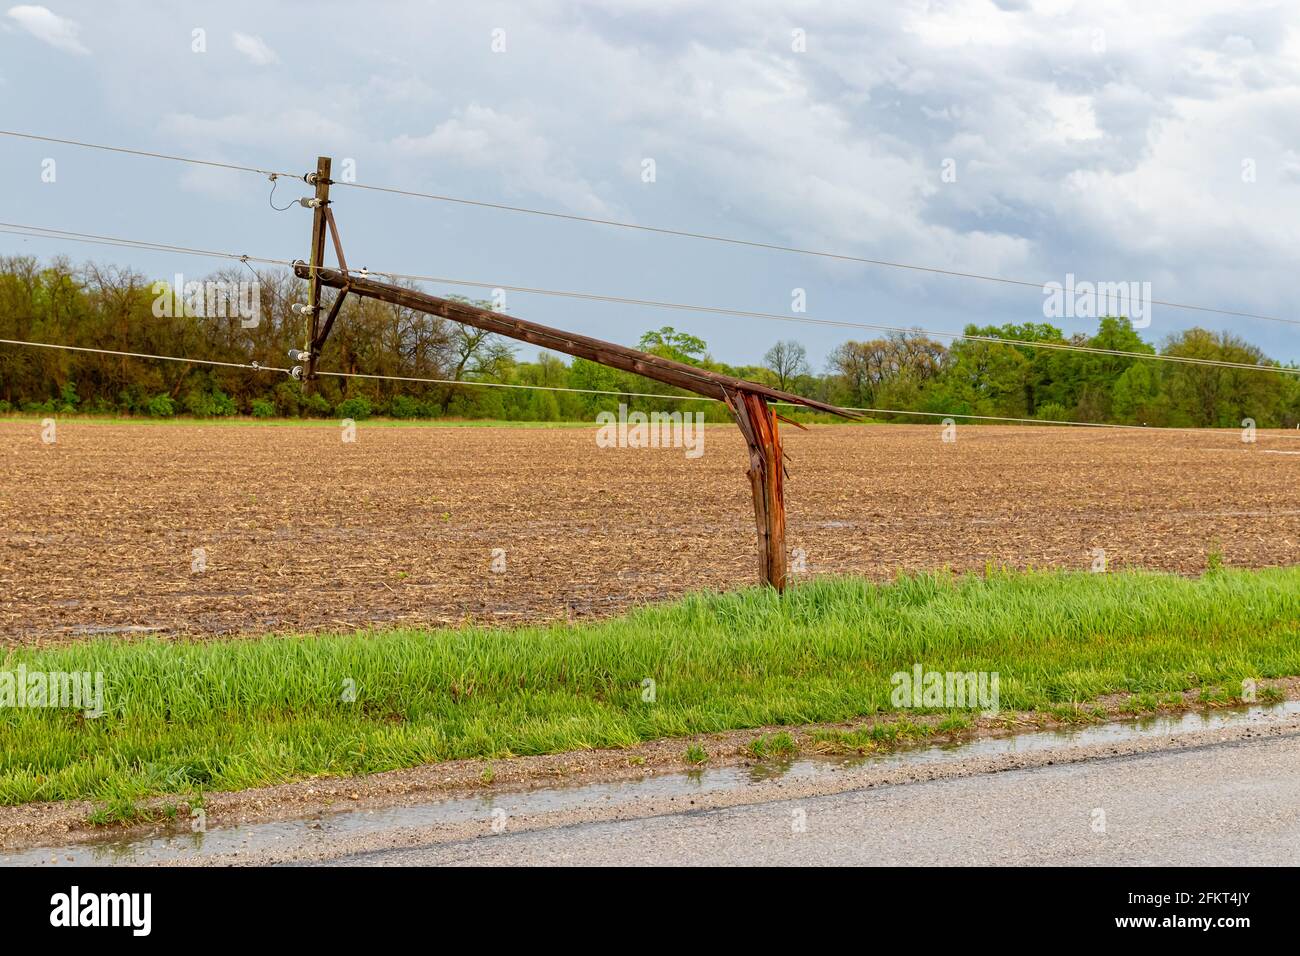 Broken electrical utility pole and power lines due to severe weather. Concept of storm damage, power outage, and electricity danger. Stock Photo